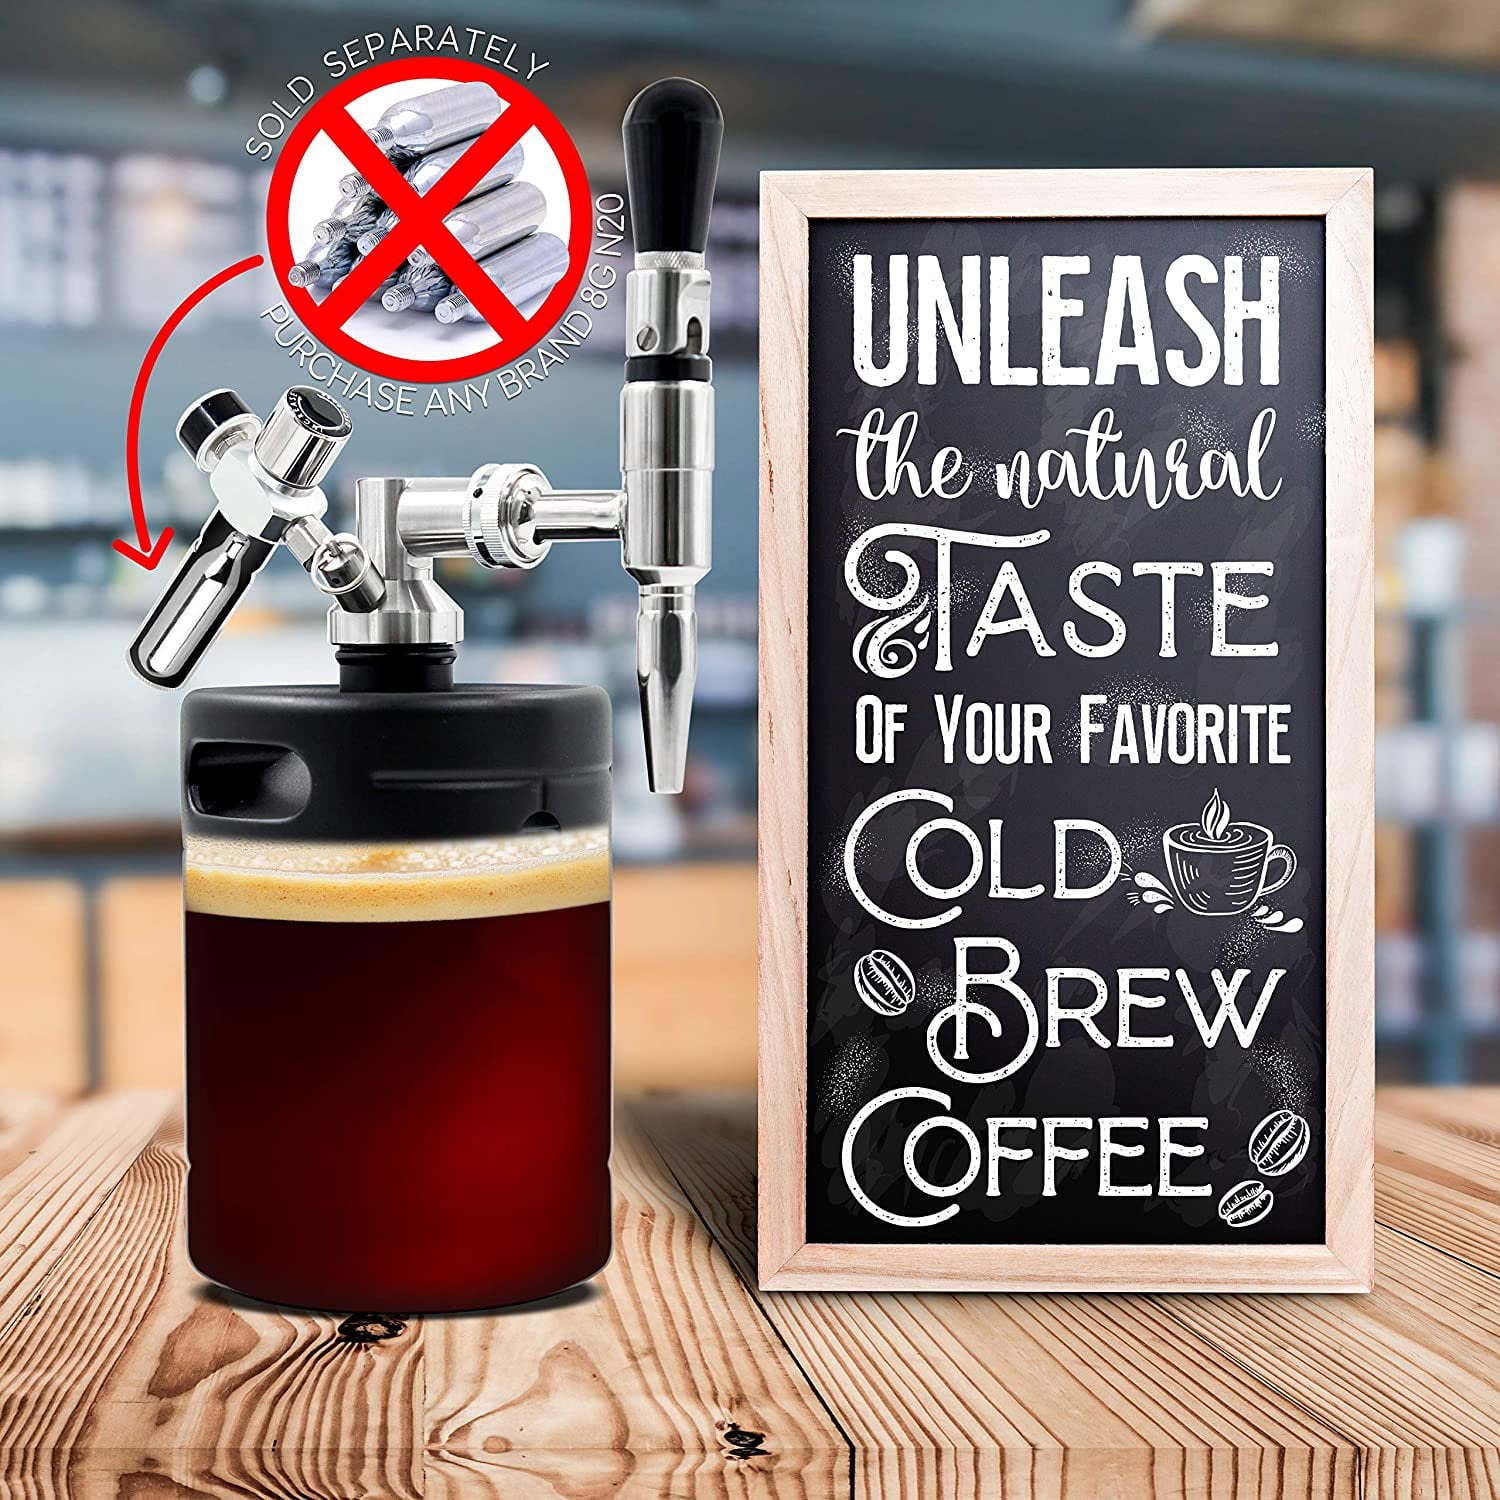 Enjoy homemade Nitro cold brew coffee with this kickass coffee maker from  beer lovers - Thebitbag